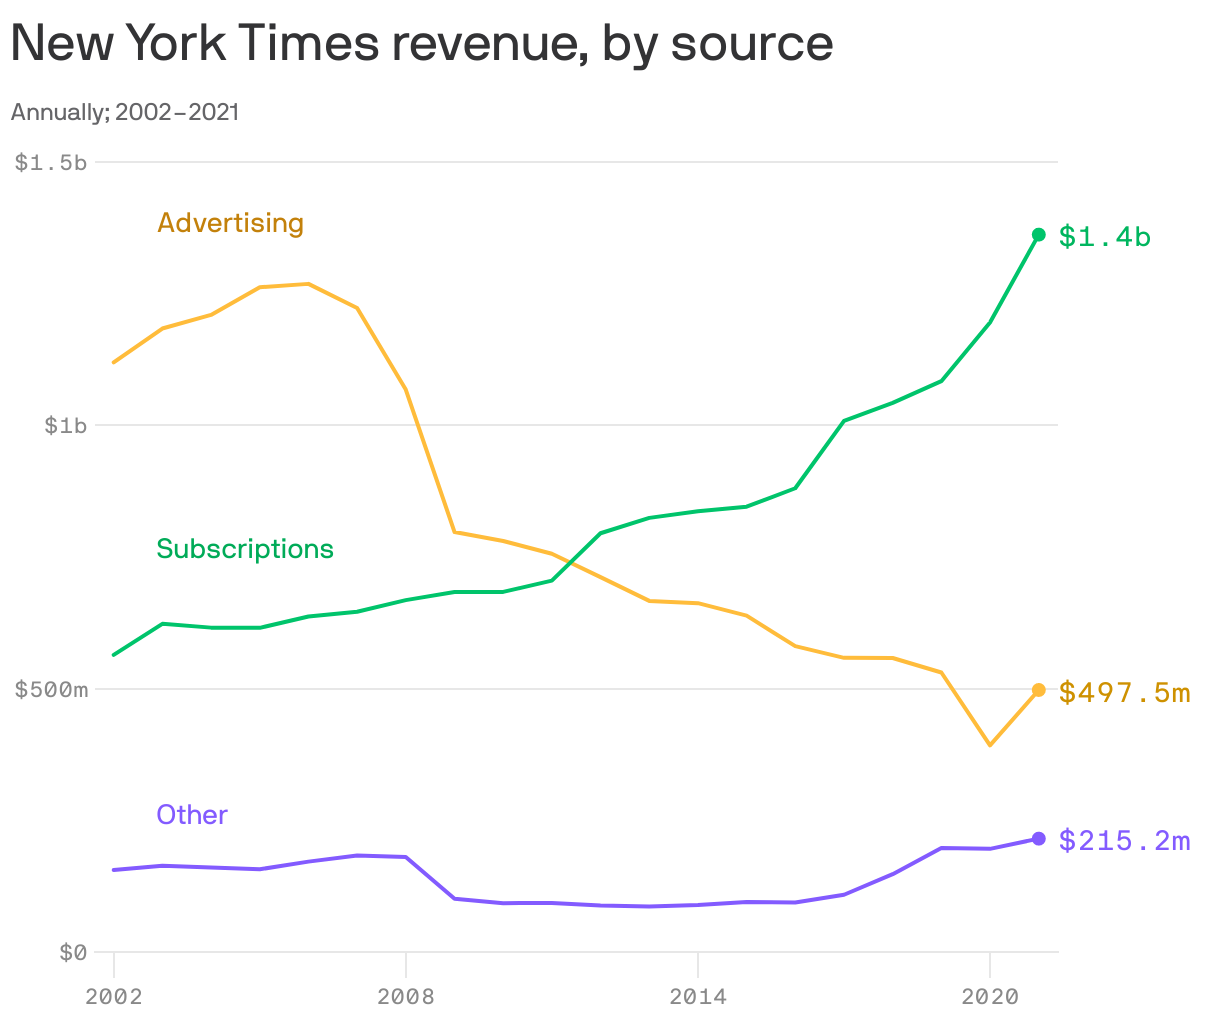 New York Times revenue, by source